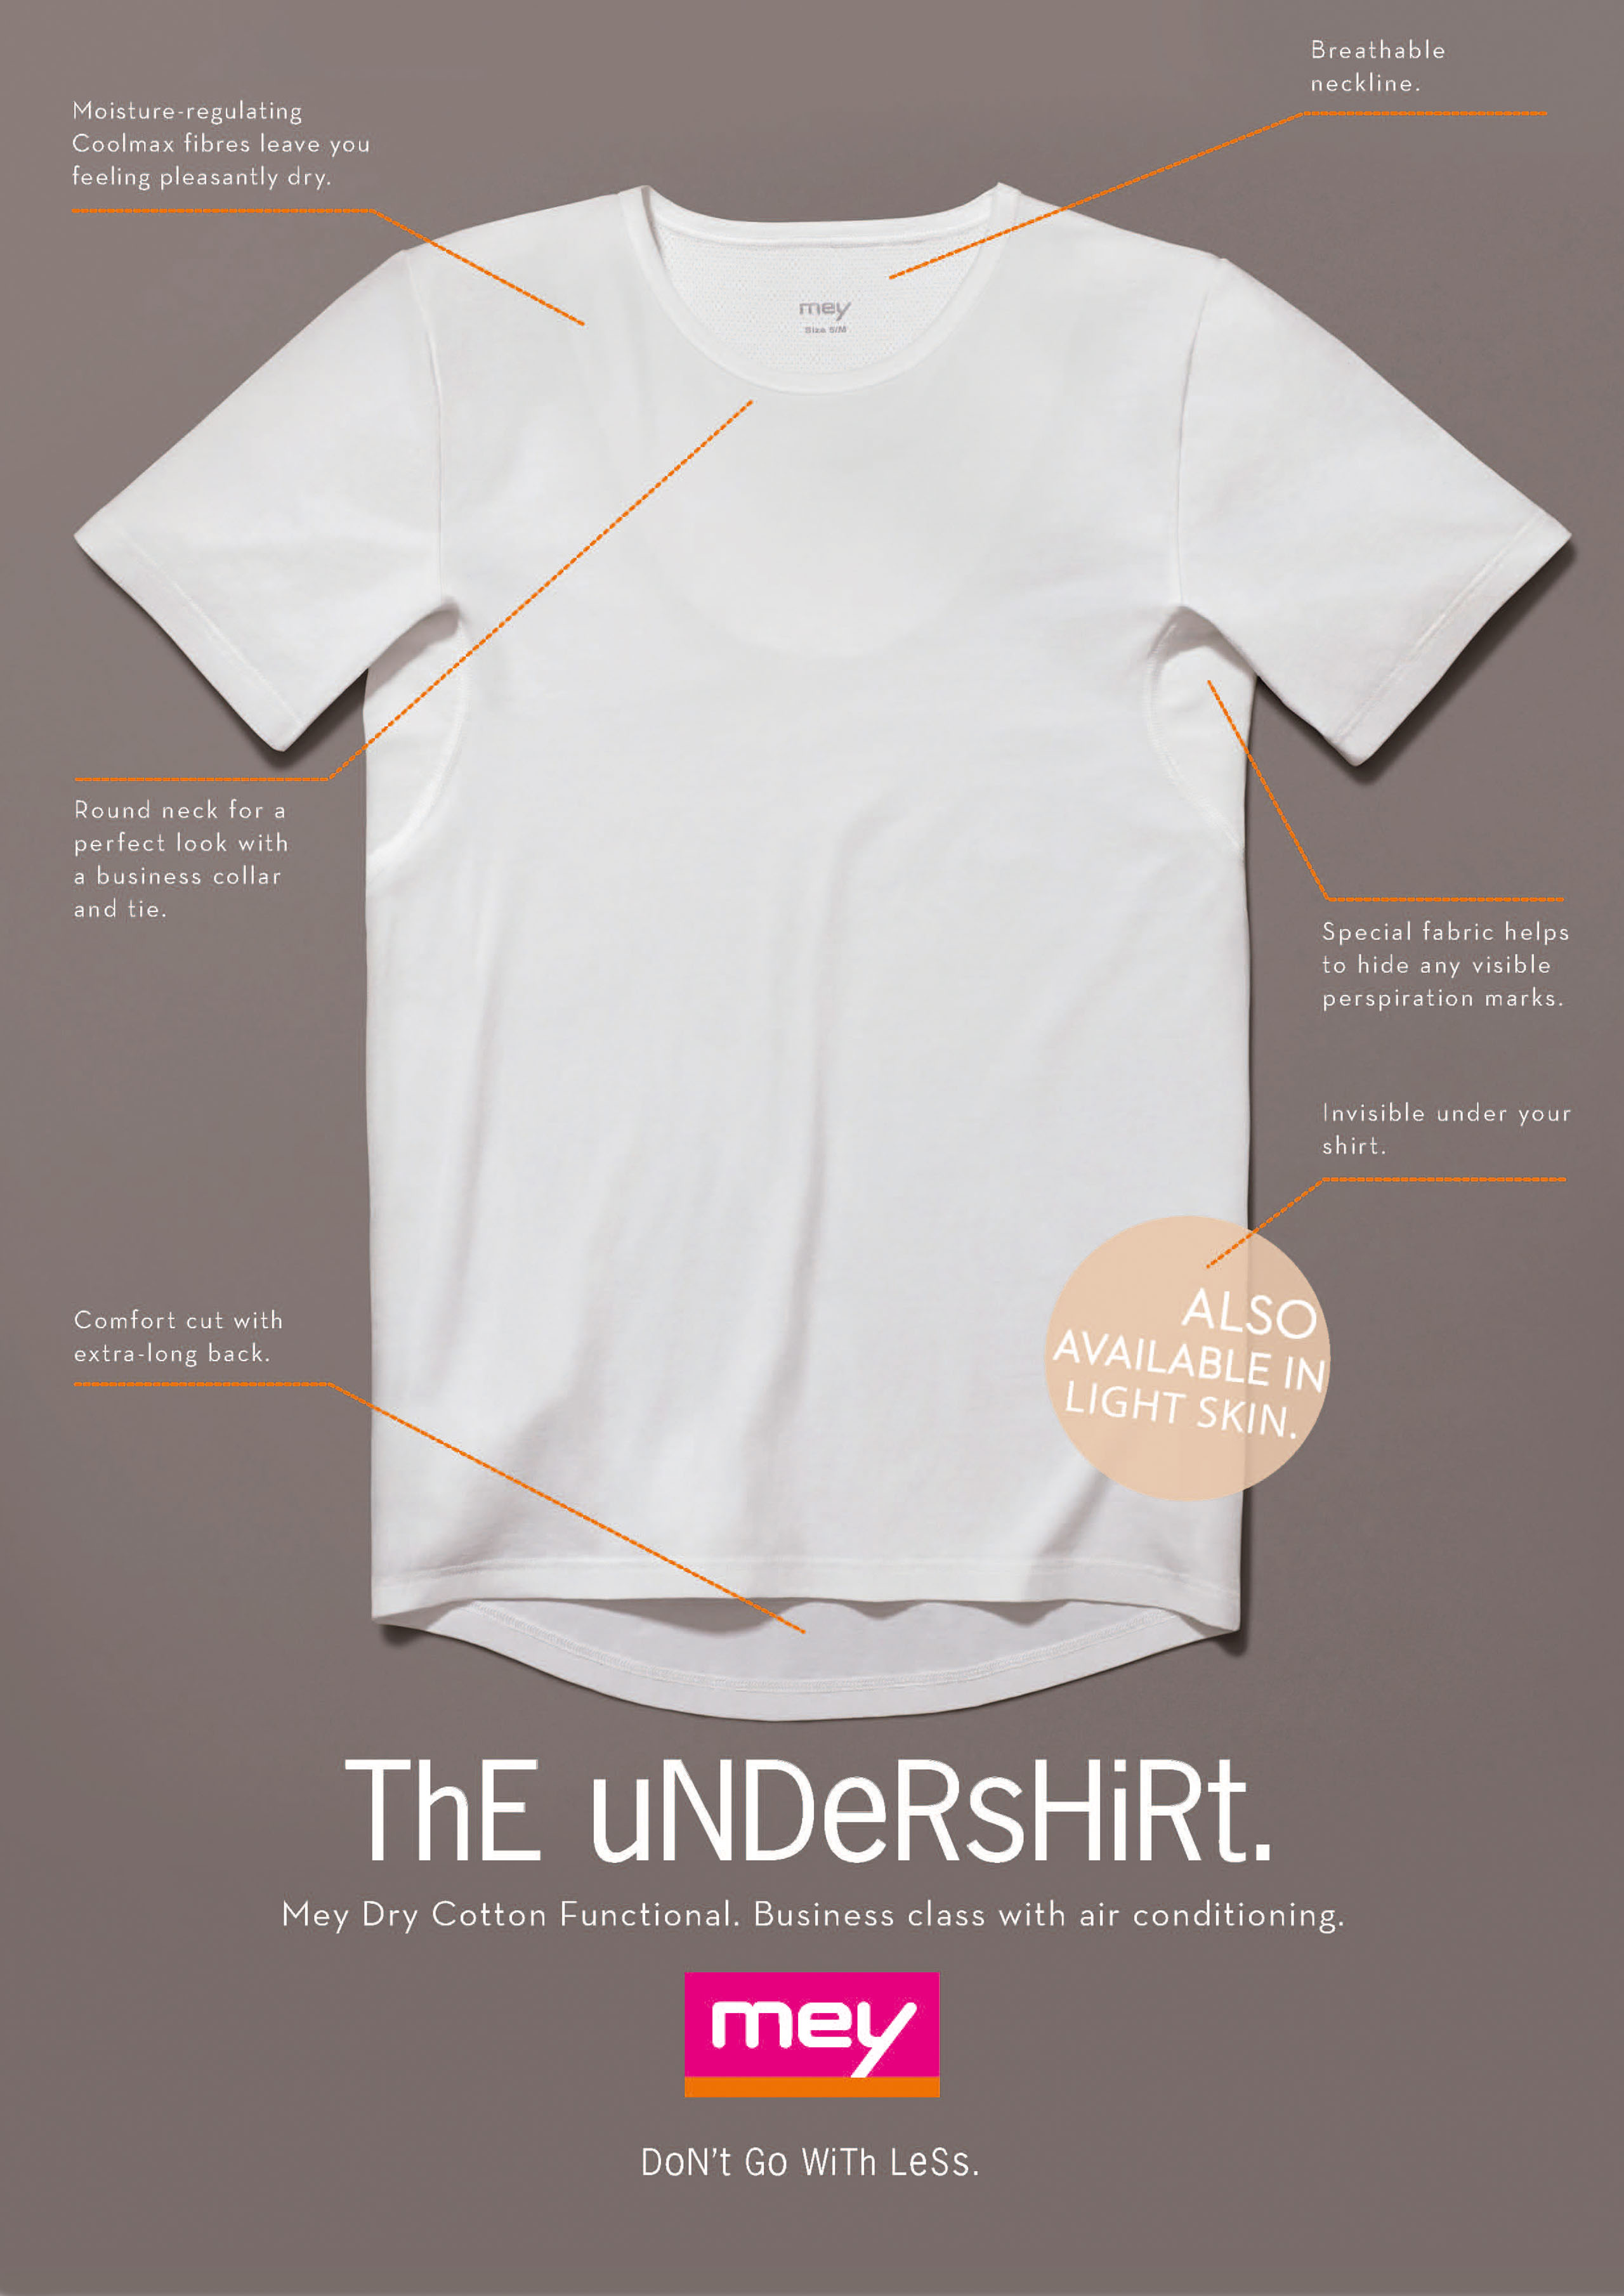 advertisement for the Undershirt: an innovation for businessmen, no sweat patches or odour under the shirt, presentation of the shirt with benefits | mey®